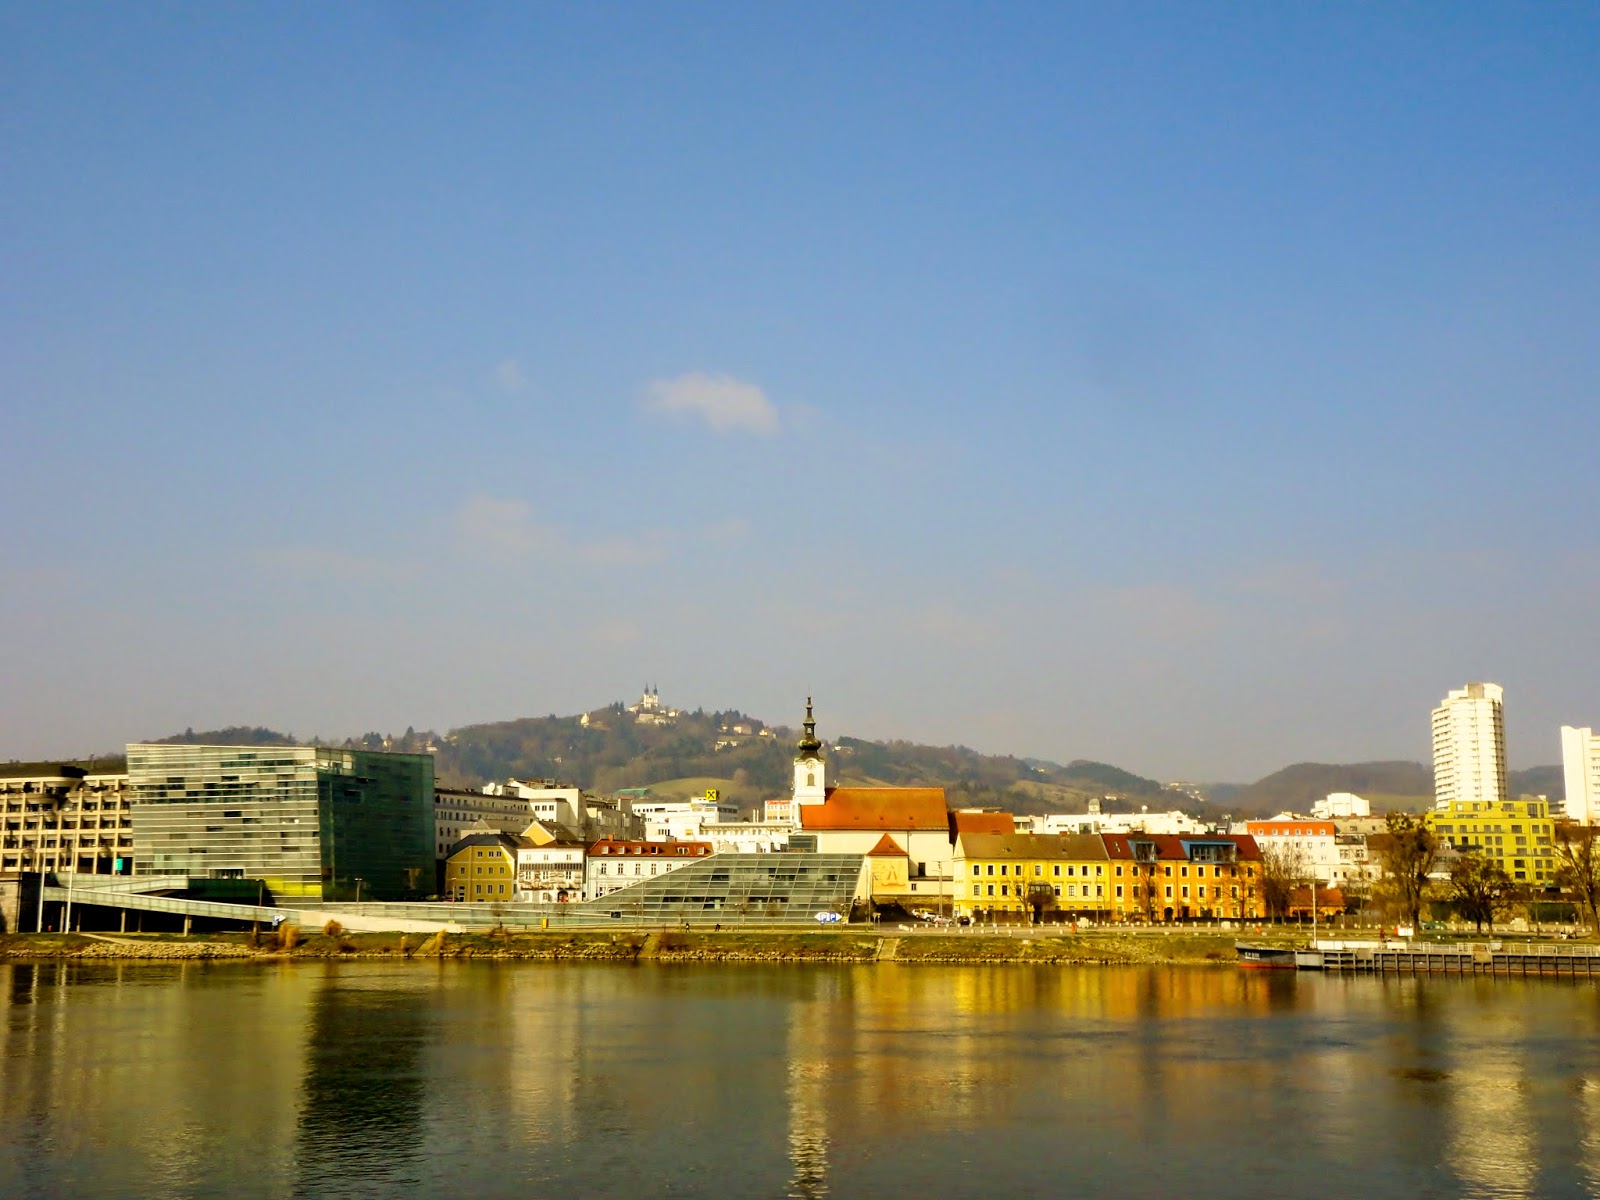 View over the river in Linz, Austria